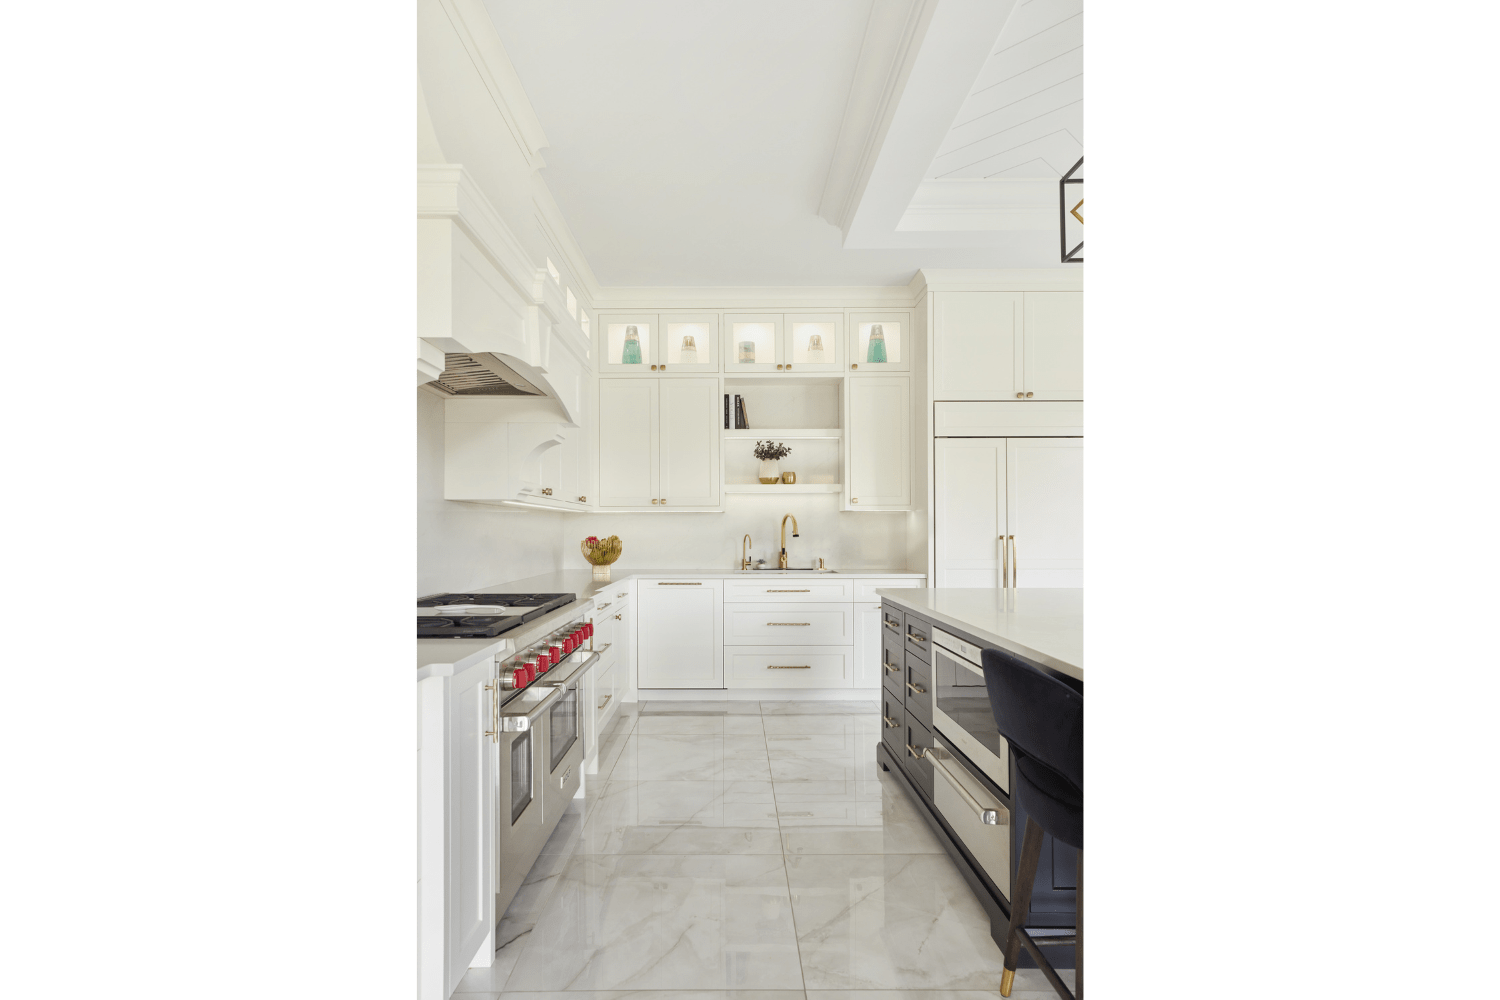 White transitional kitchen sink view with open shelving